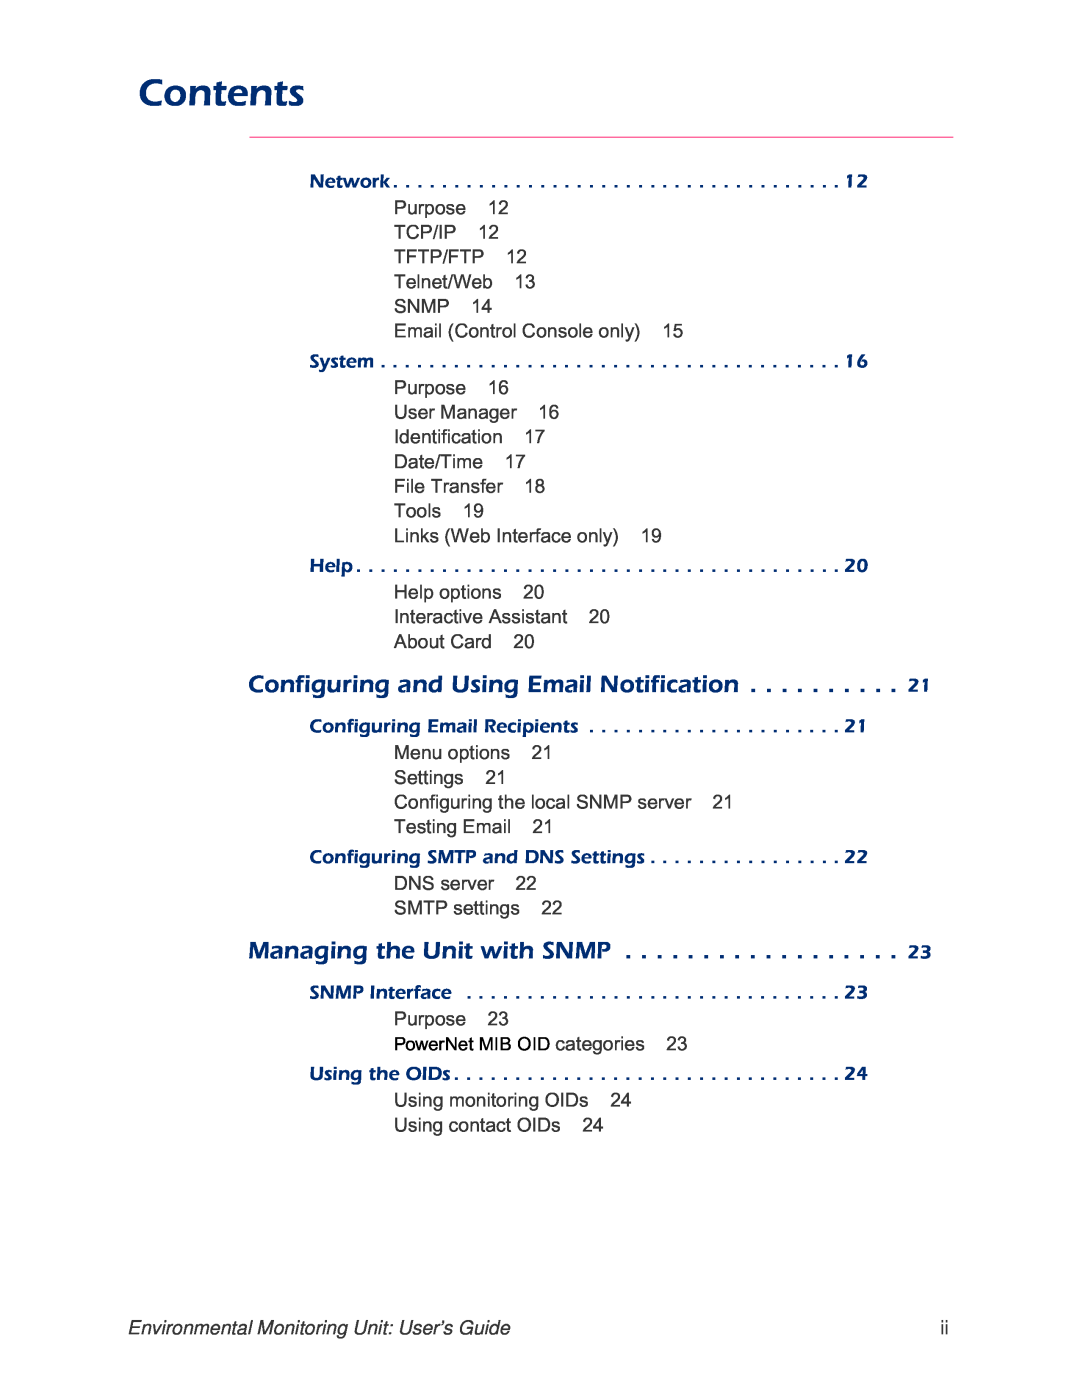 APC AP9312TH manual Contents, Configuring and Using Email Notification, Managing the Unit with SNMP, Network, System, Help 